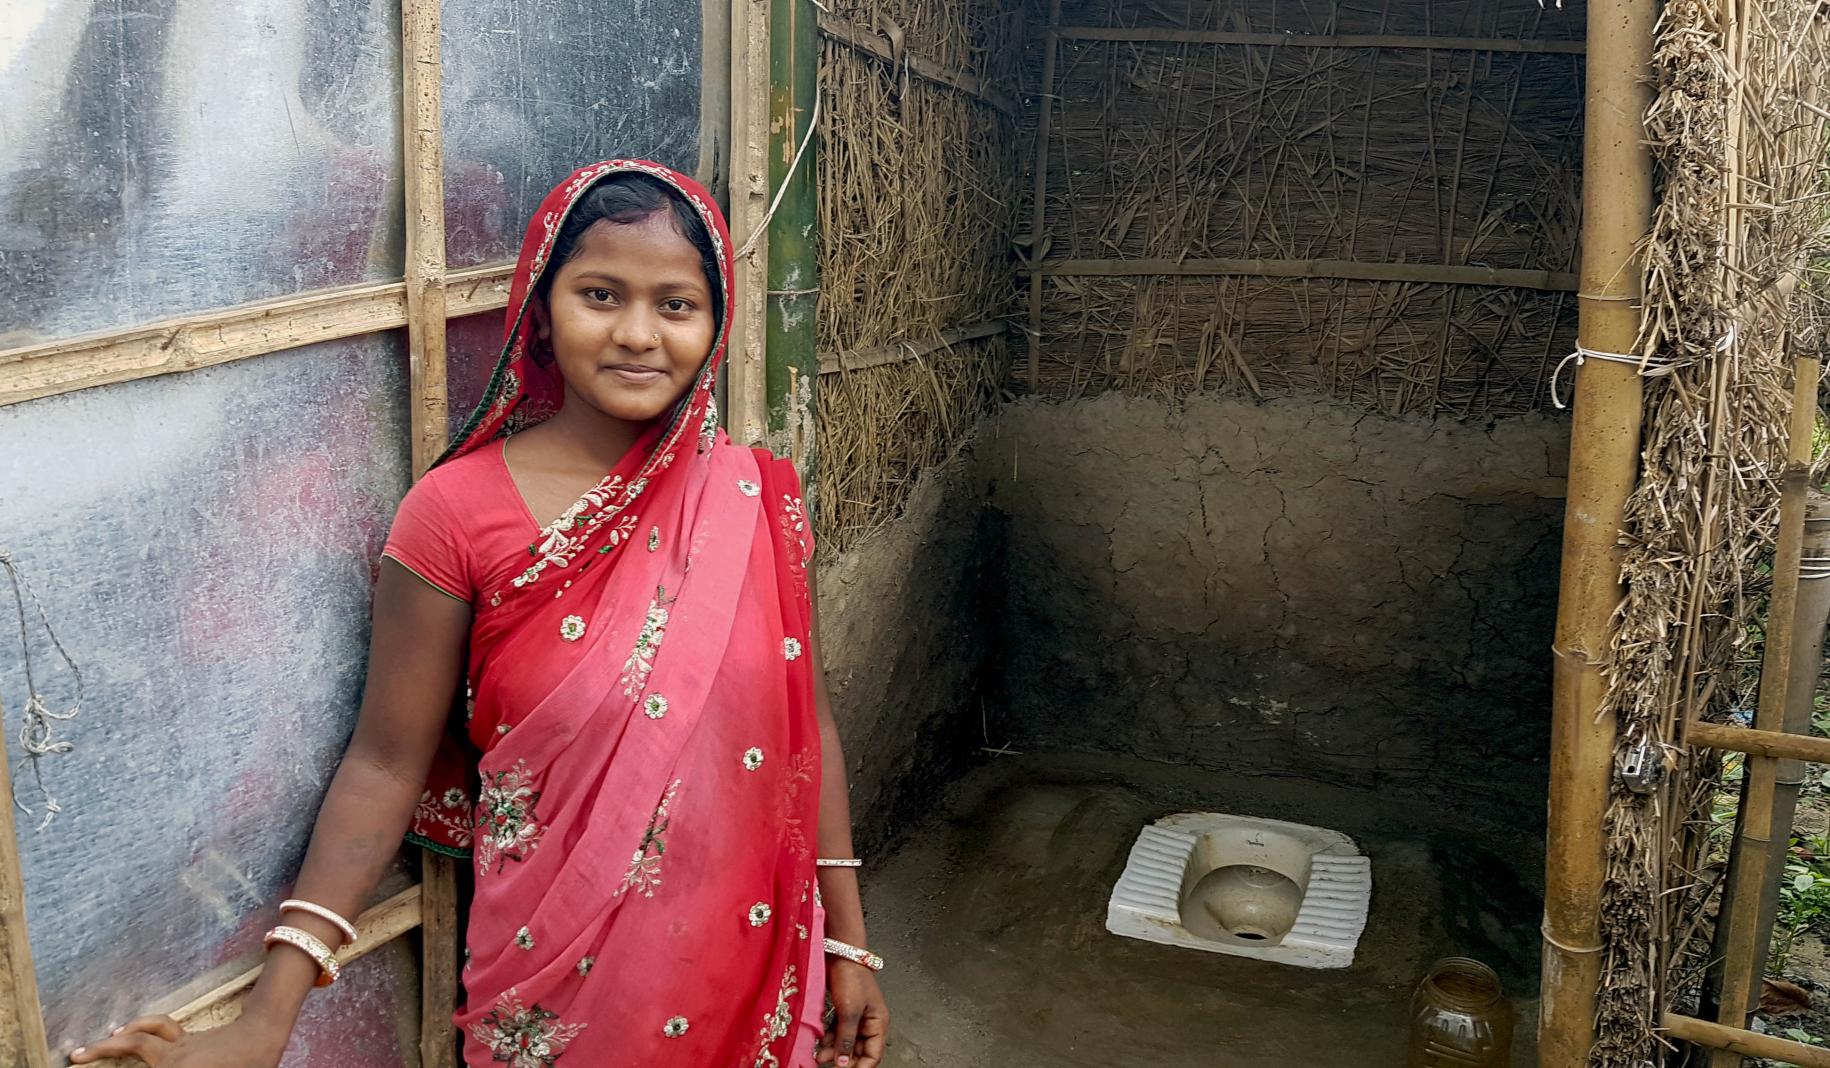 A young girl smiles as she stands in front of a toilets in Belbari.